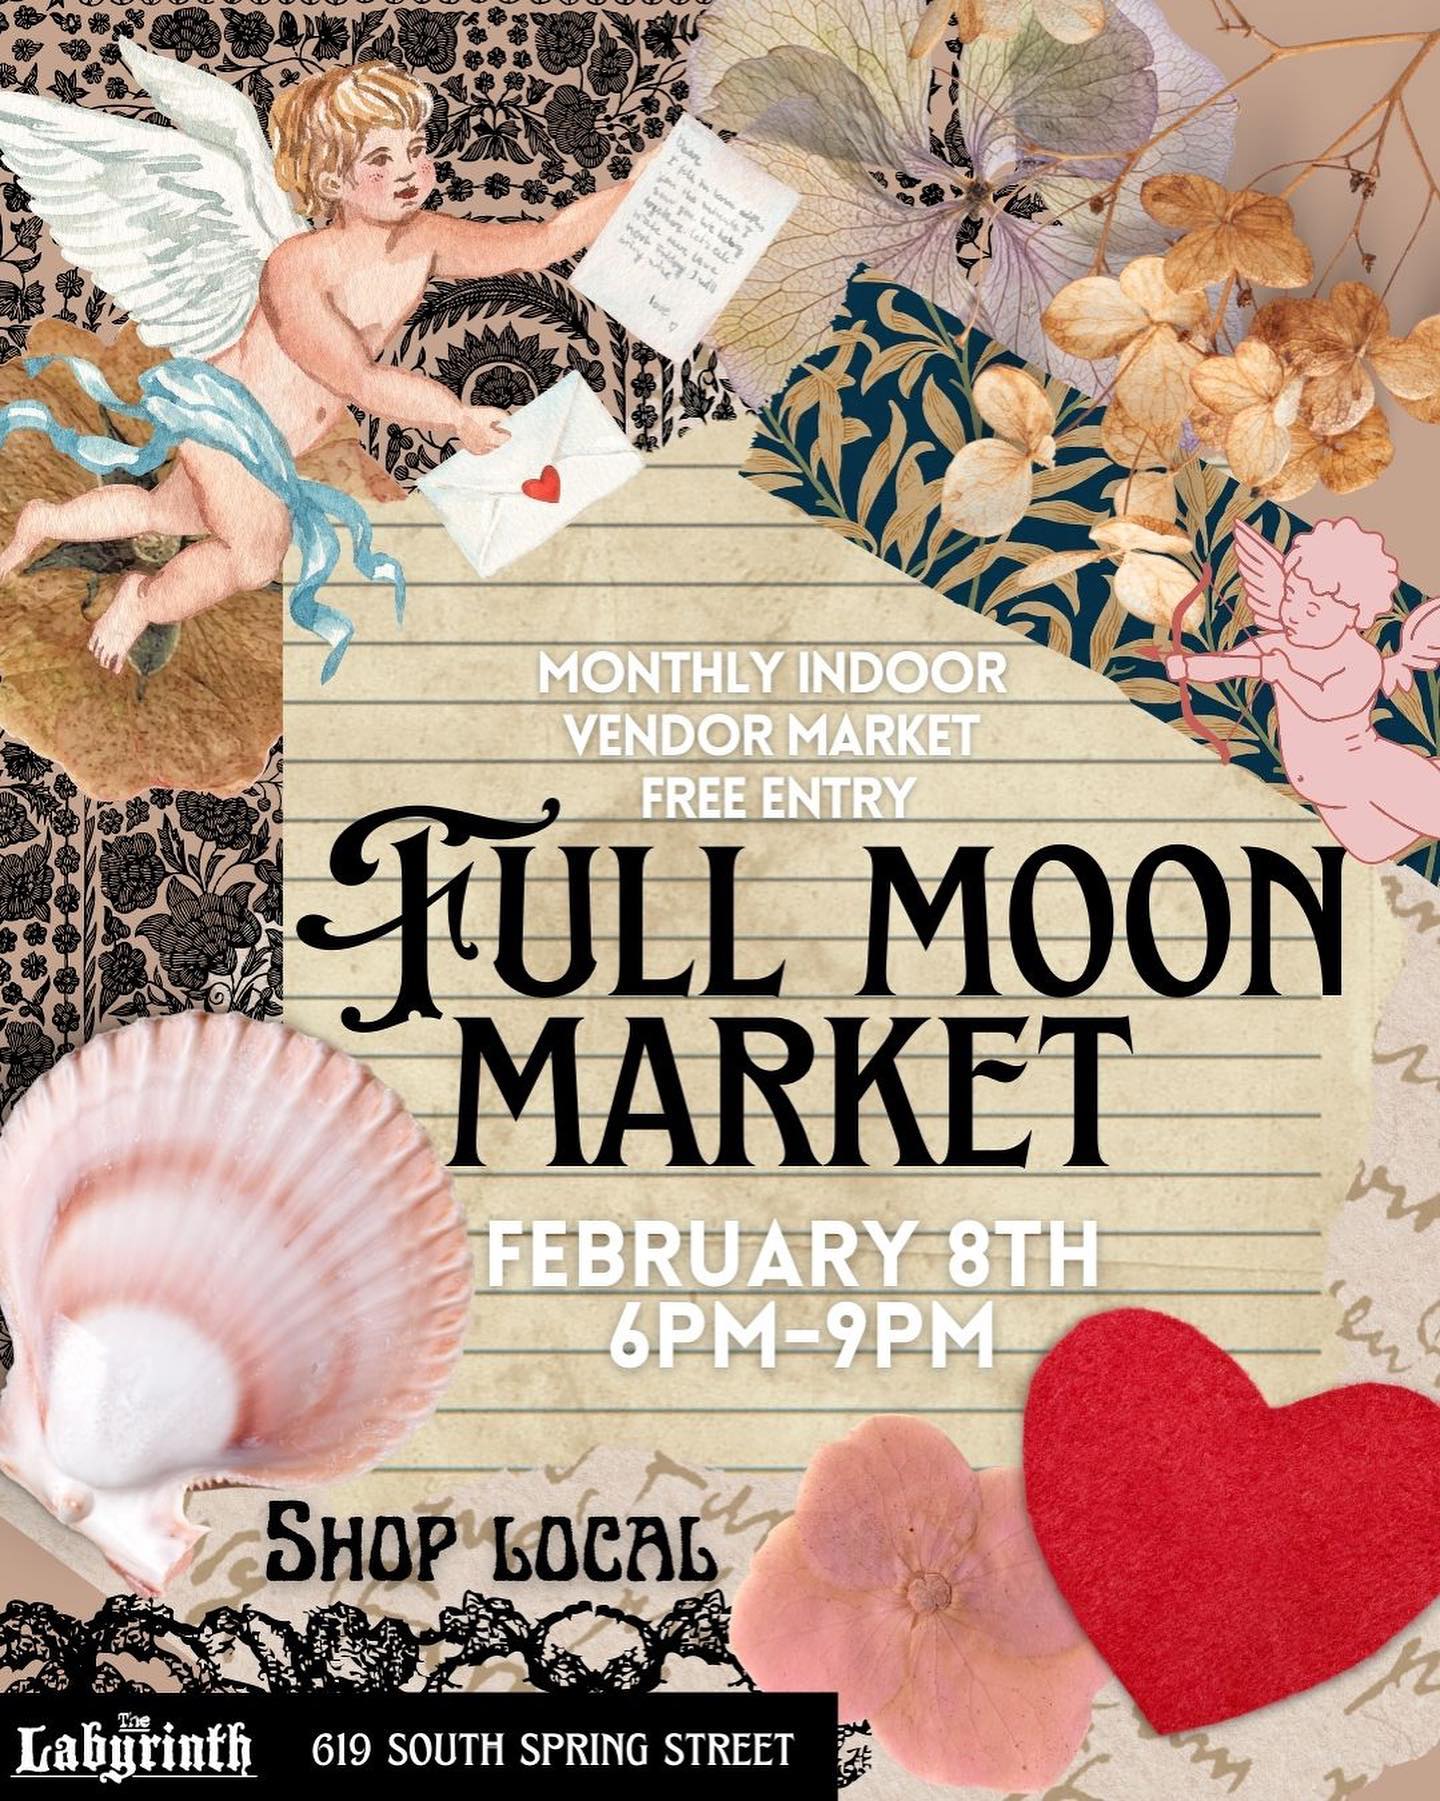 Flyer for the February Full Moon Market at The Labyrinth, 619 South Spring Street, Little Rock, Arkansas, on Wednesday, February 8, 2023 at 6 PM to 9 PM. Monthly indoor vendor market, with free entry. Some of the vendors include:  Beautywood Books, Shop Popychild, Dragon Jewelz, Readings by Crystal Glass, Nicole Lamondie, Posse Paper Goods, BWG Herbal Tea, Angel Mays Art, FashionAddictzz, Mouth Mouth, Terahdacyl Candles, The Green Thumb Artist, Flake Baby, Houseplant Colection, and more